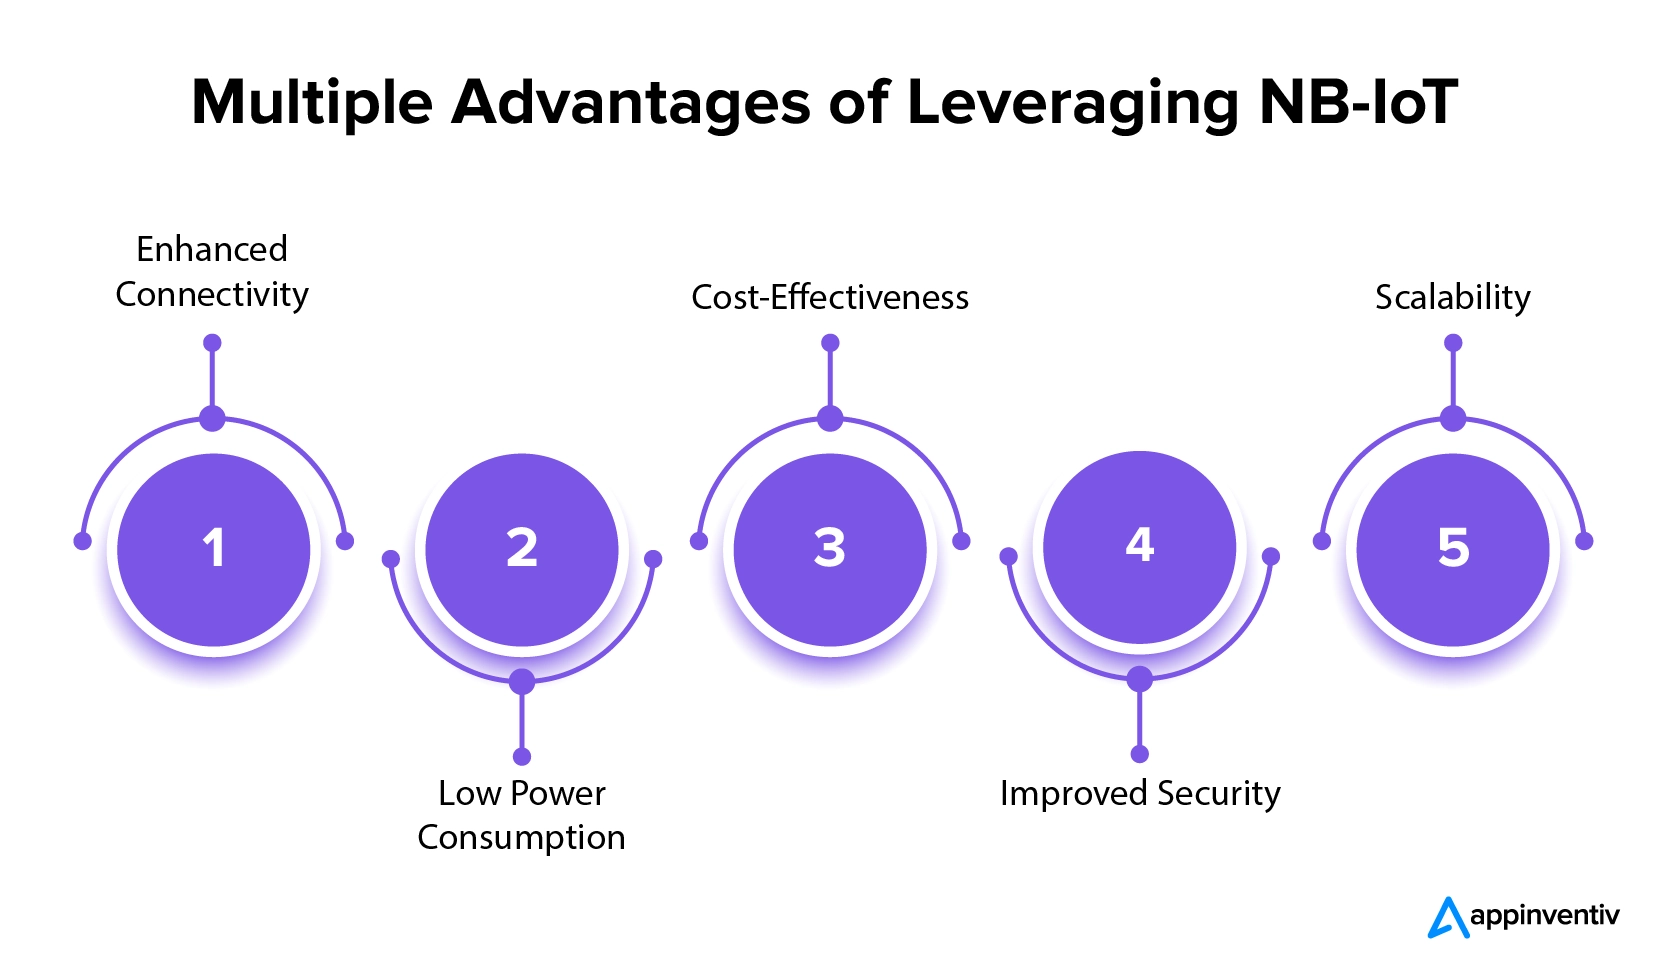 Multiple Advantages of Leveraging NB-IoT